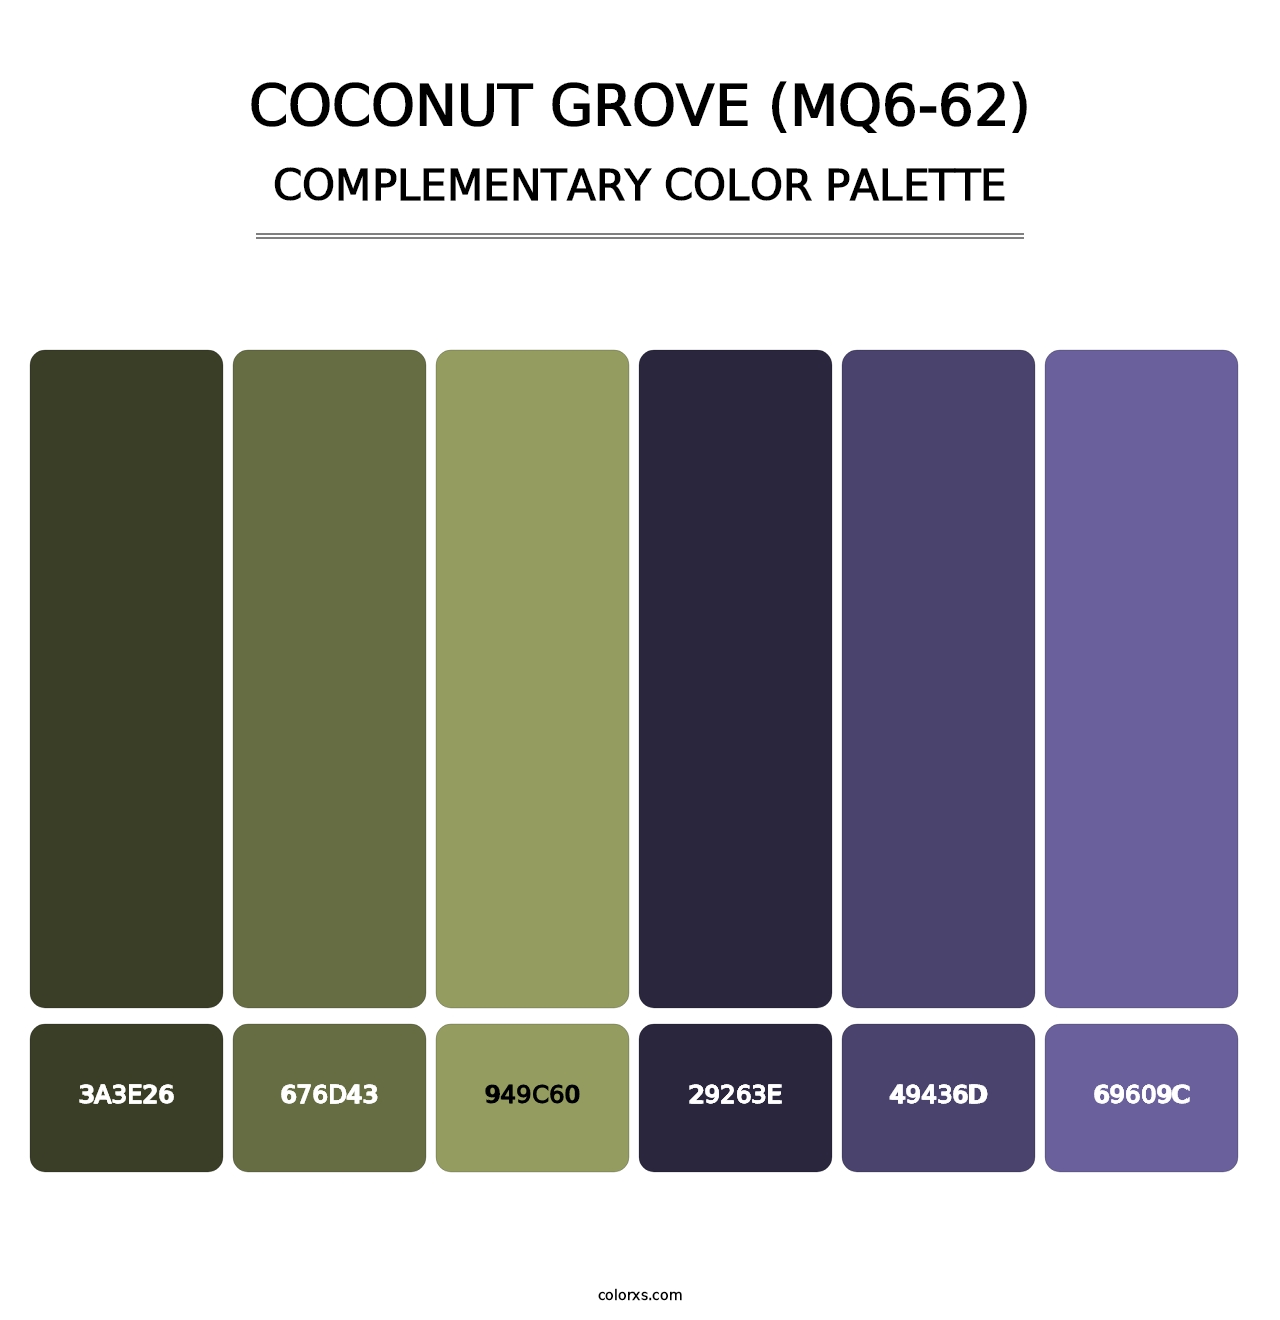 Coconut Grove (MQ6-62) - Complementary Color Palette